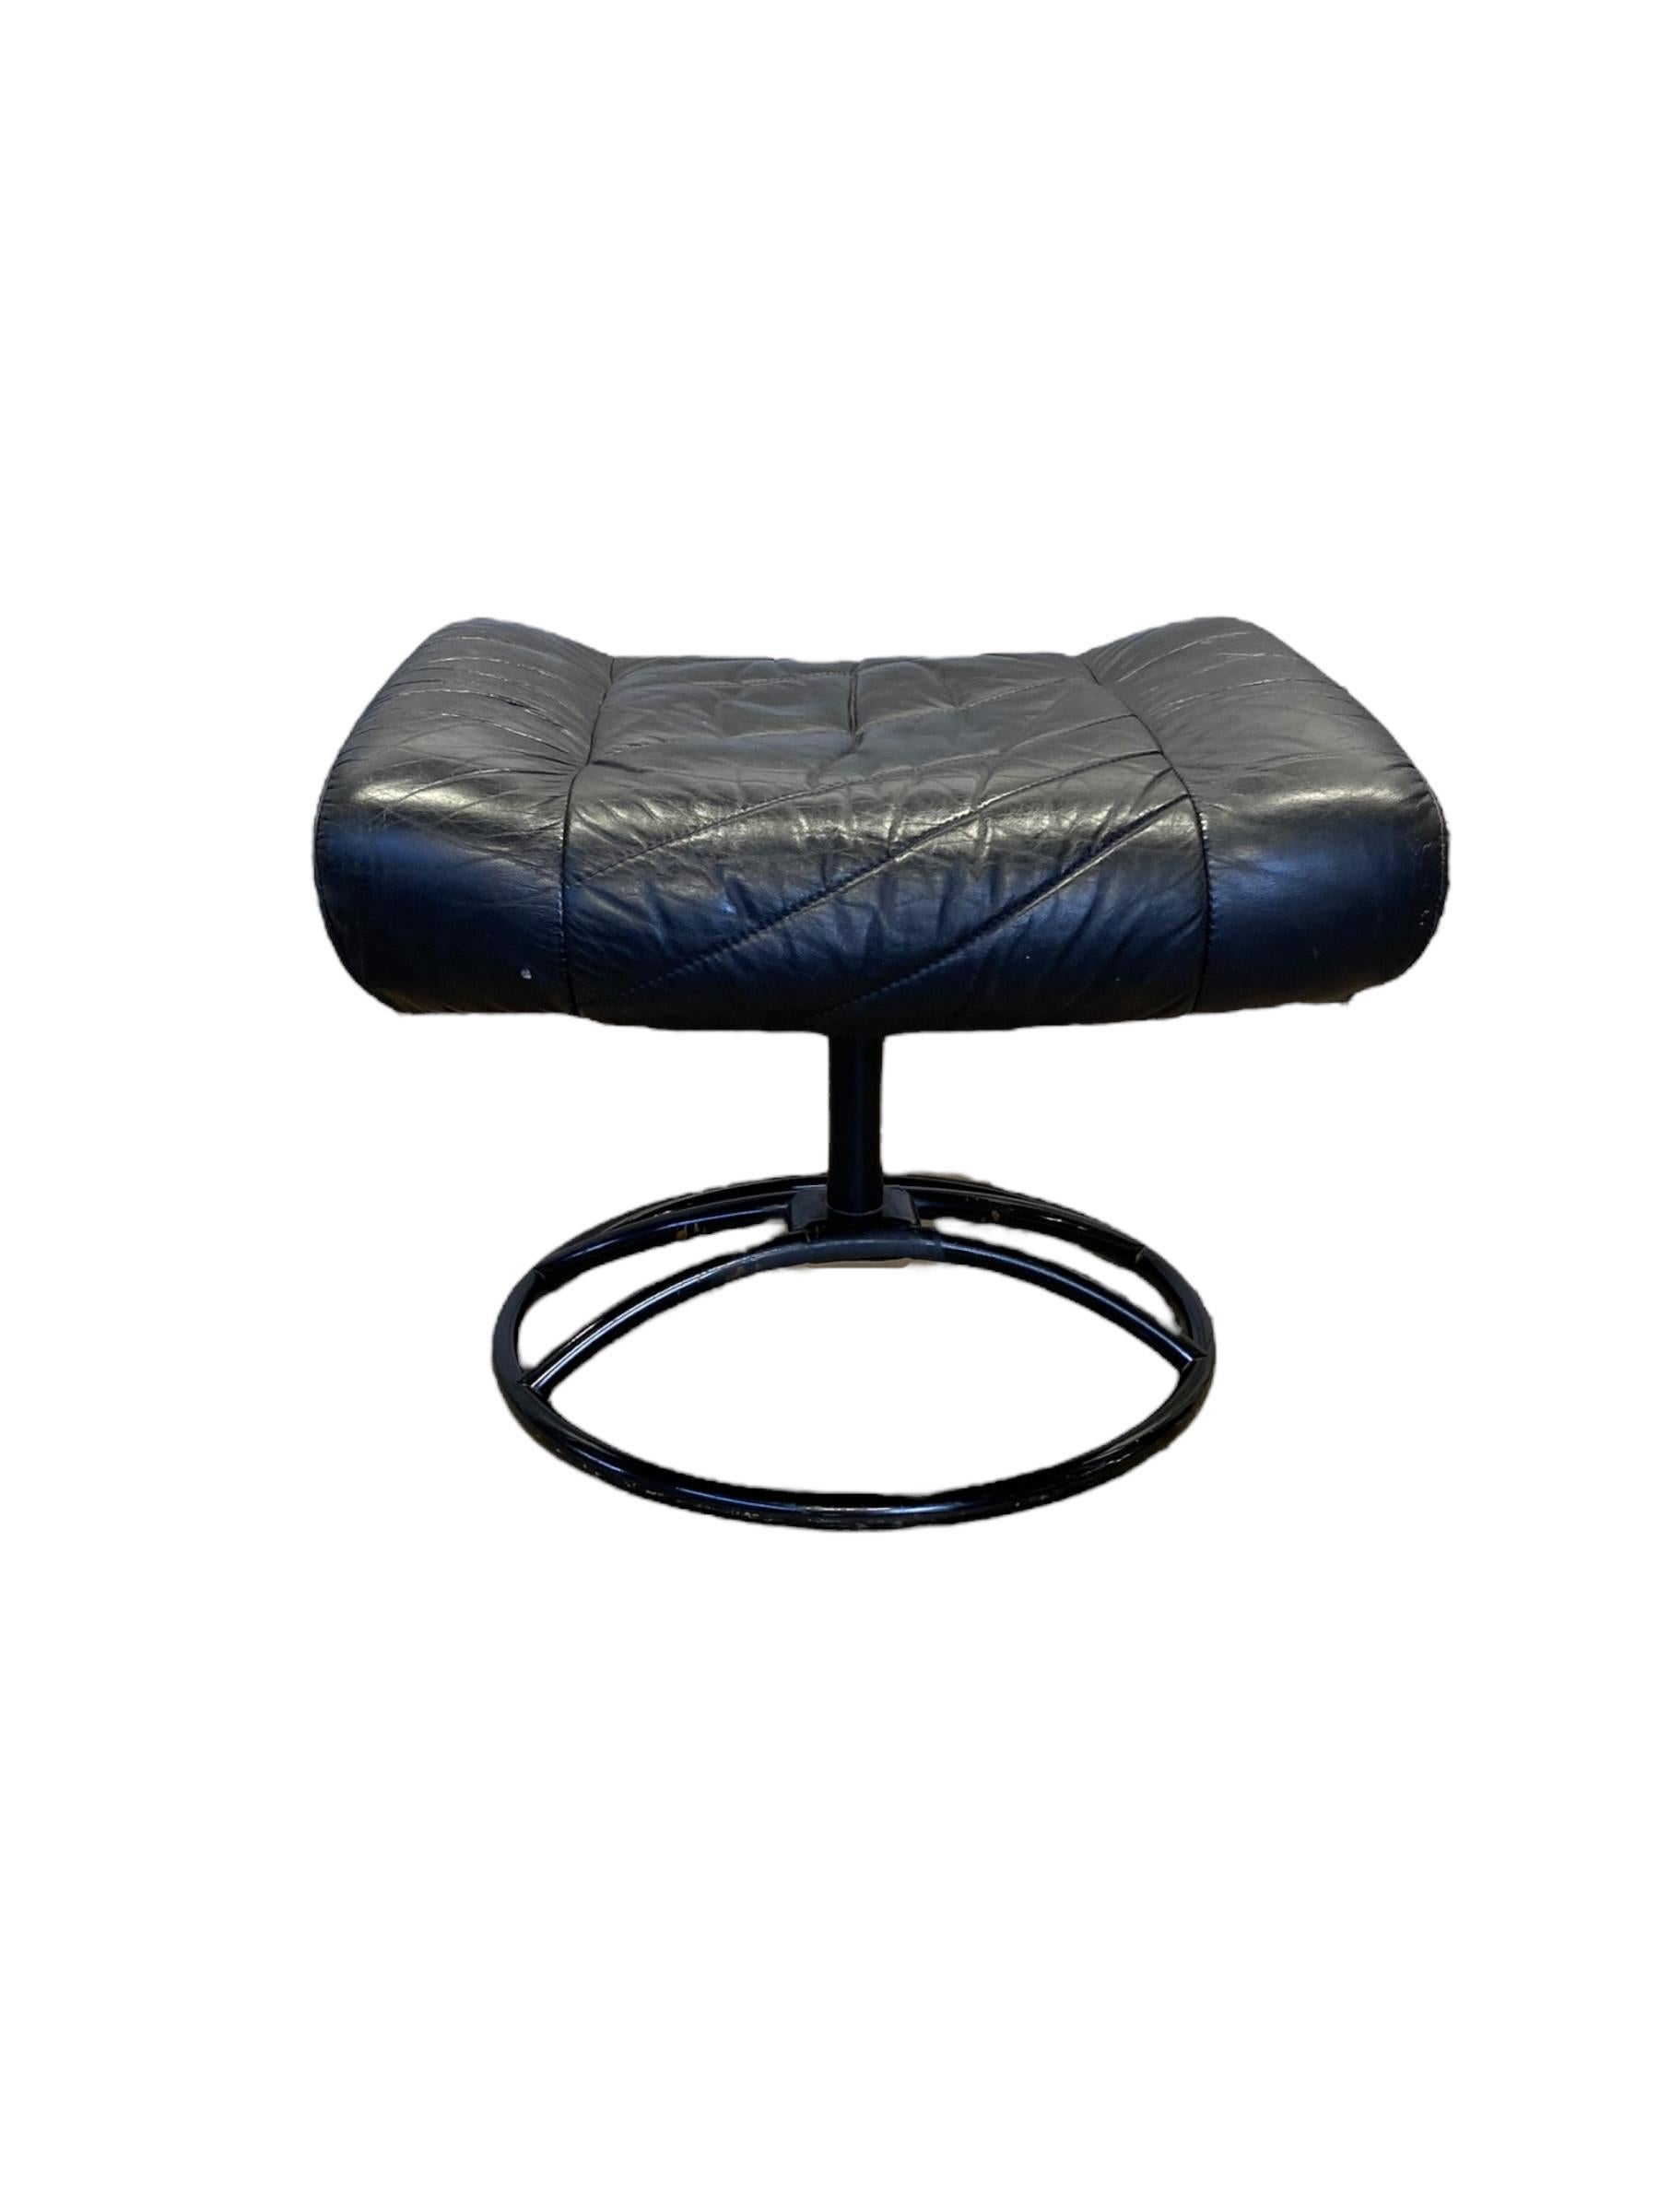 Ekornes Stressless ottoman footstool in black leather and black finish metal frame. Good vintage condition. 